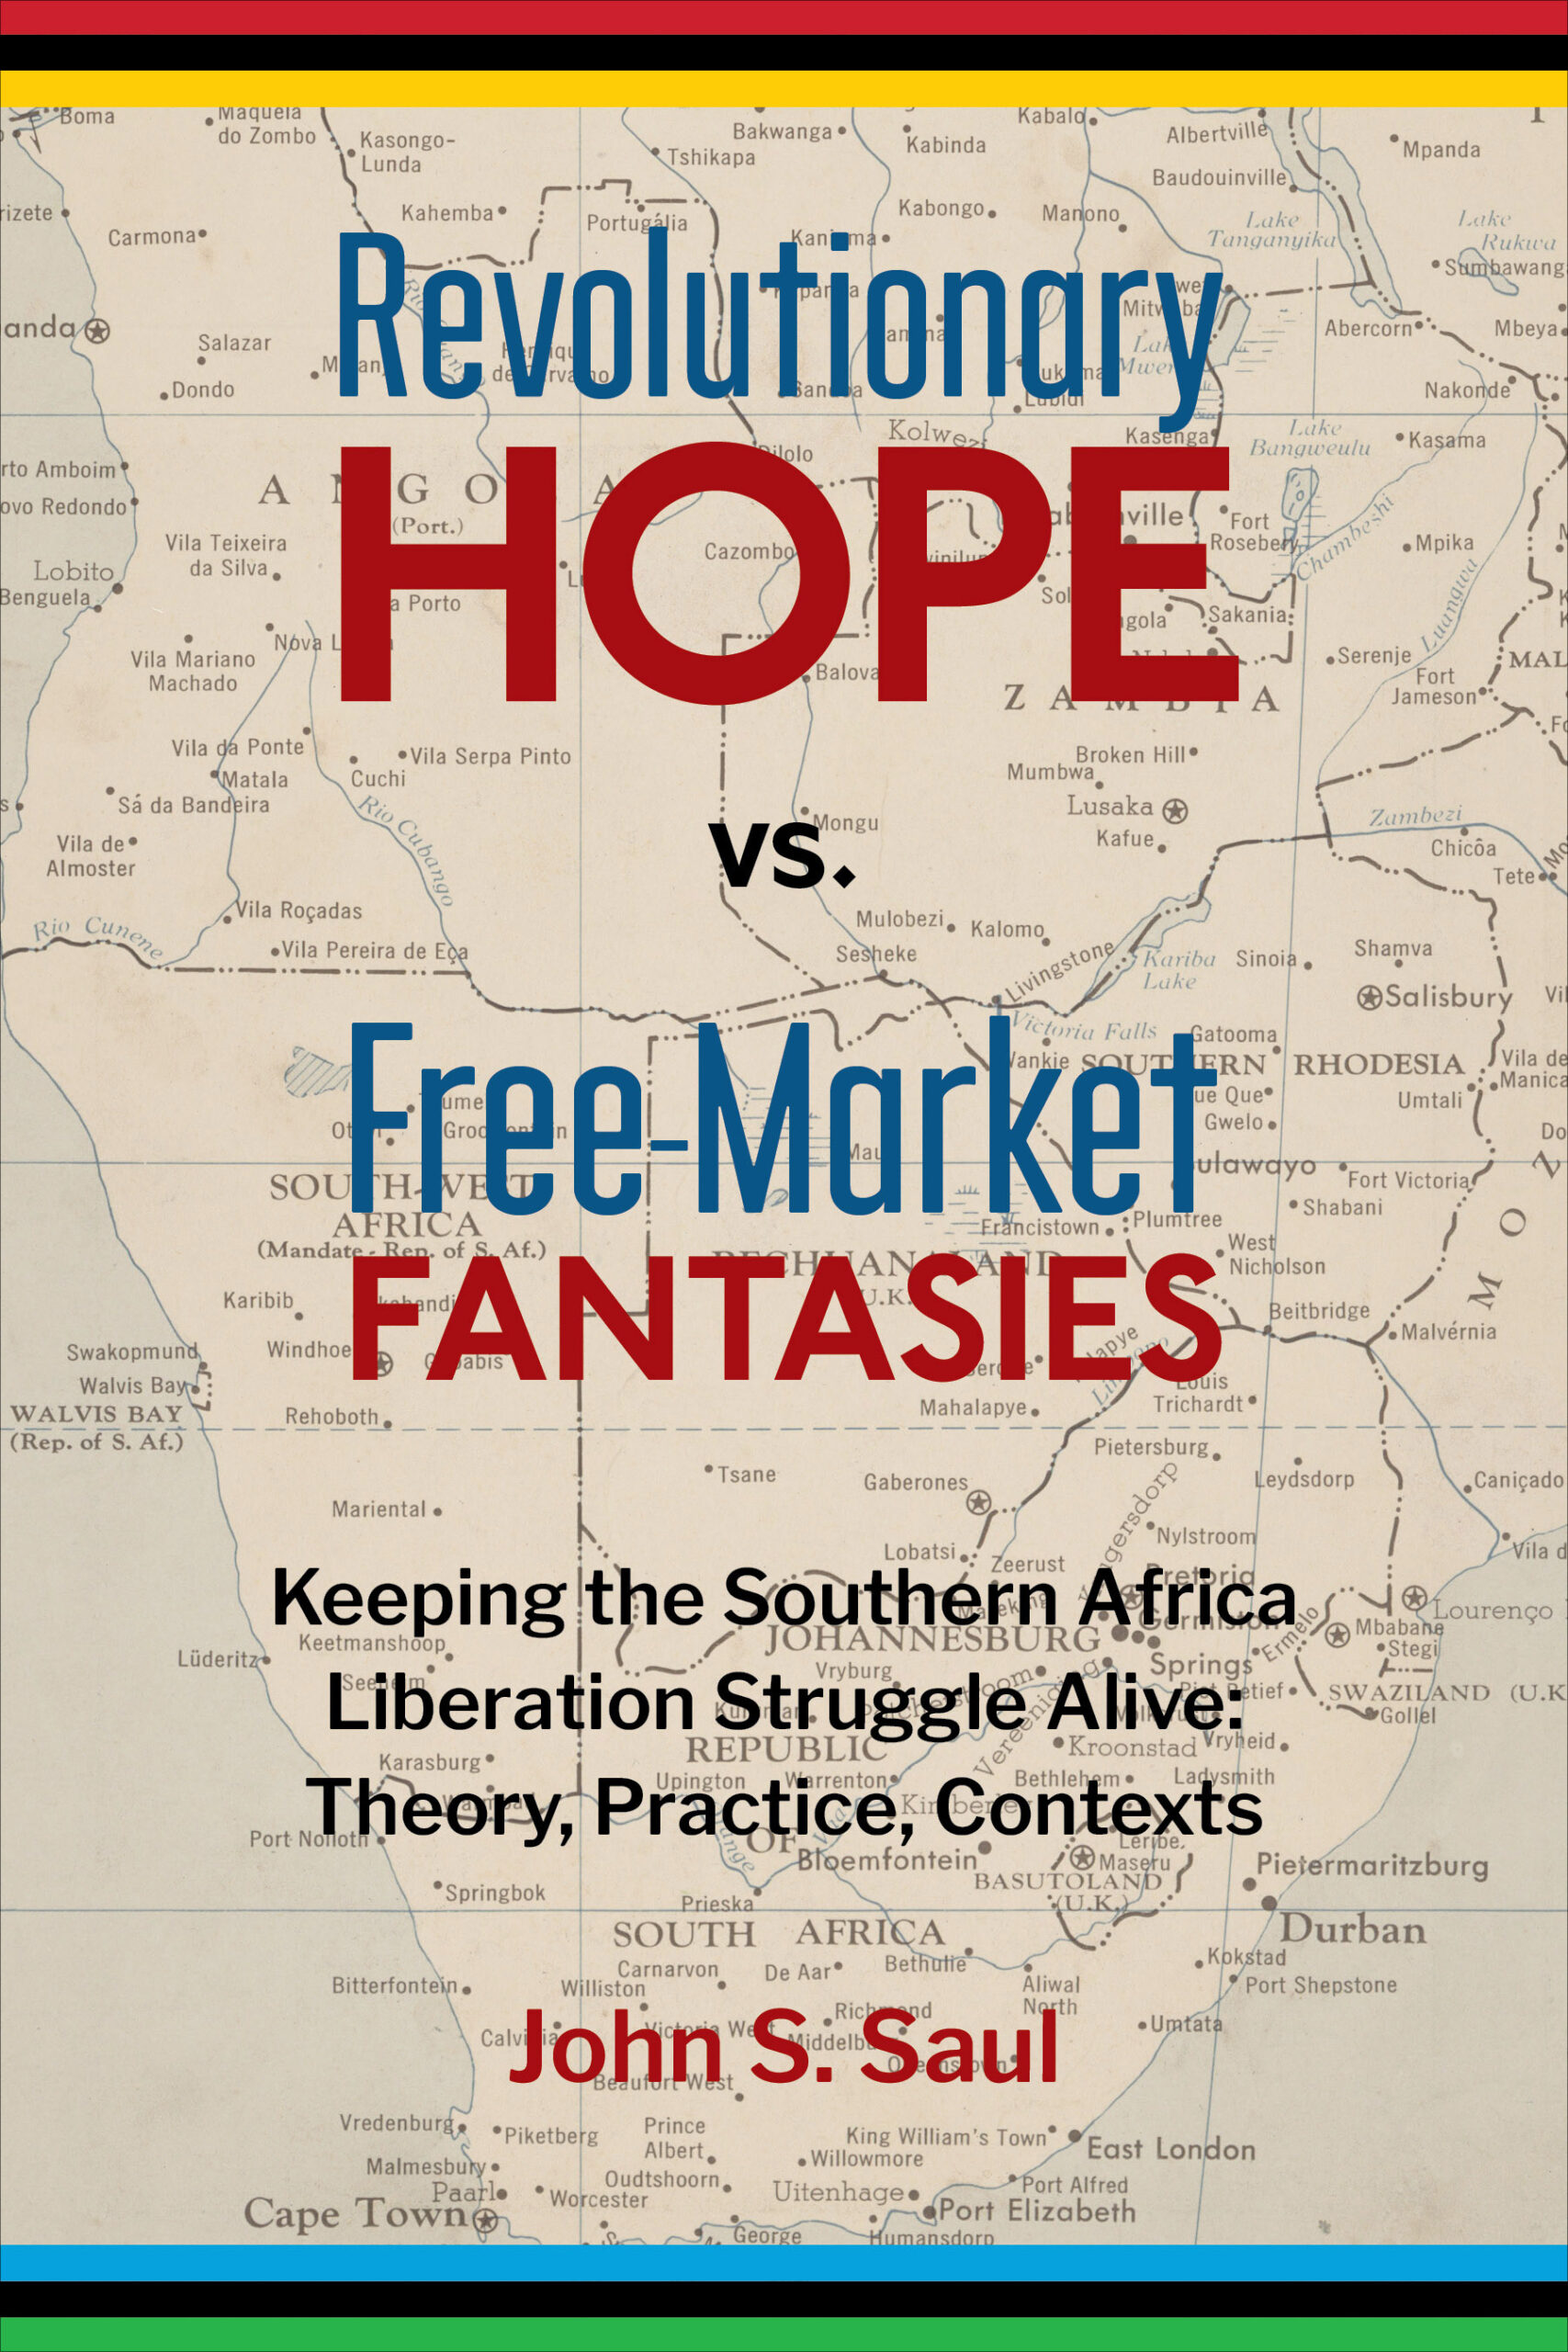 Hope　Alive:　–　Theory,　Free-Market　Context　the　Practice,　Southern　Fantasies　Africa　Struggle　Liberation　Keeping　vs　Revolutionary　DarajaPress